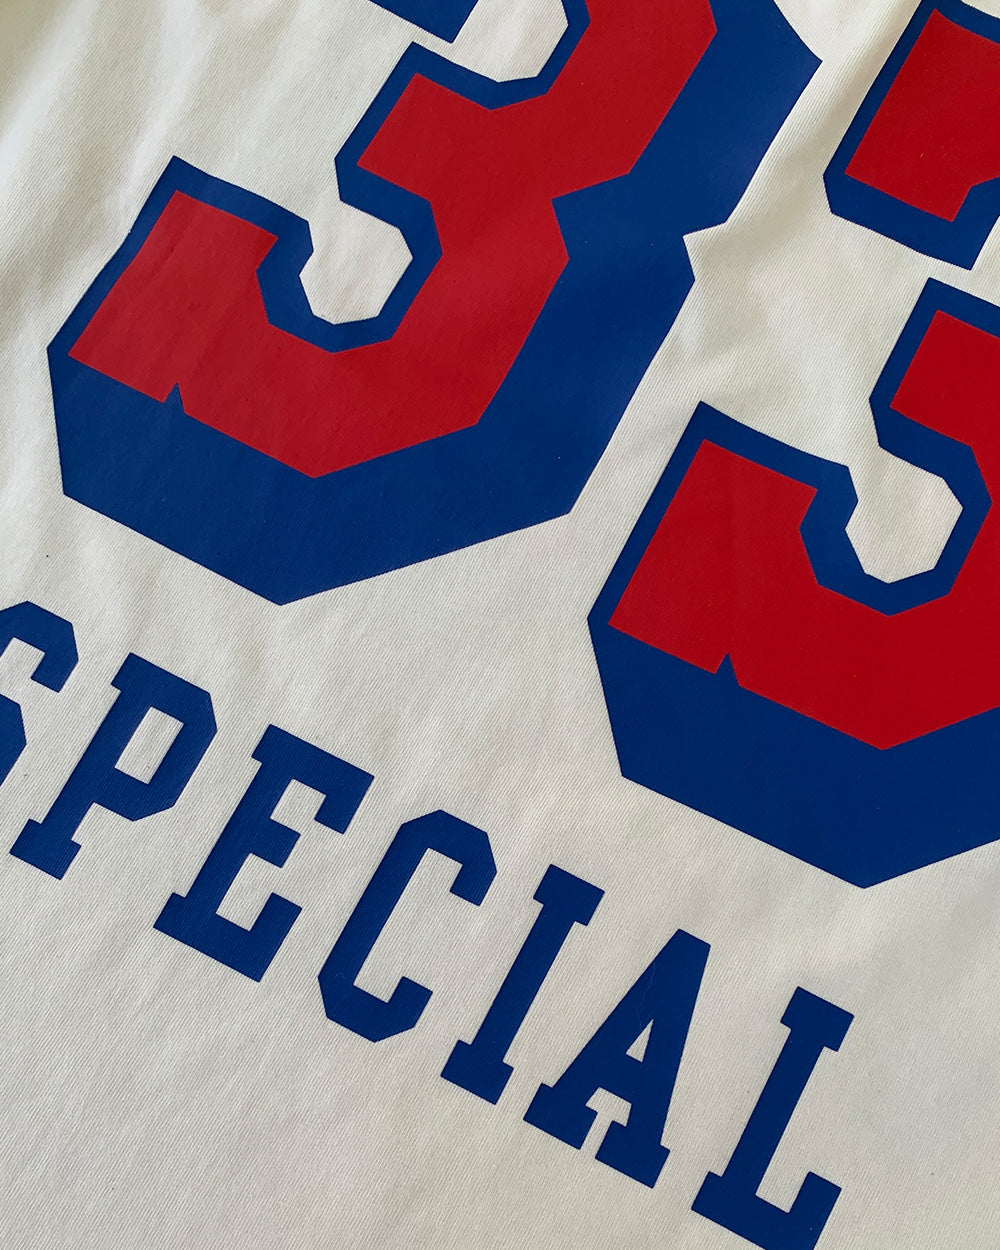 Cream Be More Special Tee